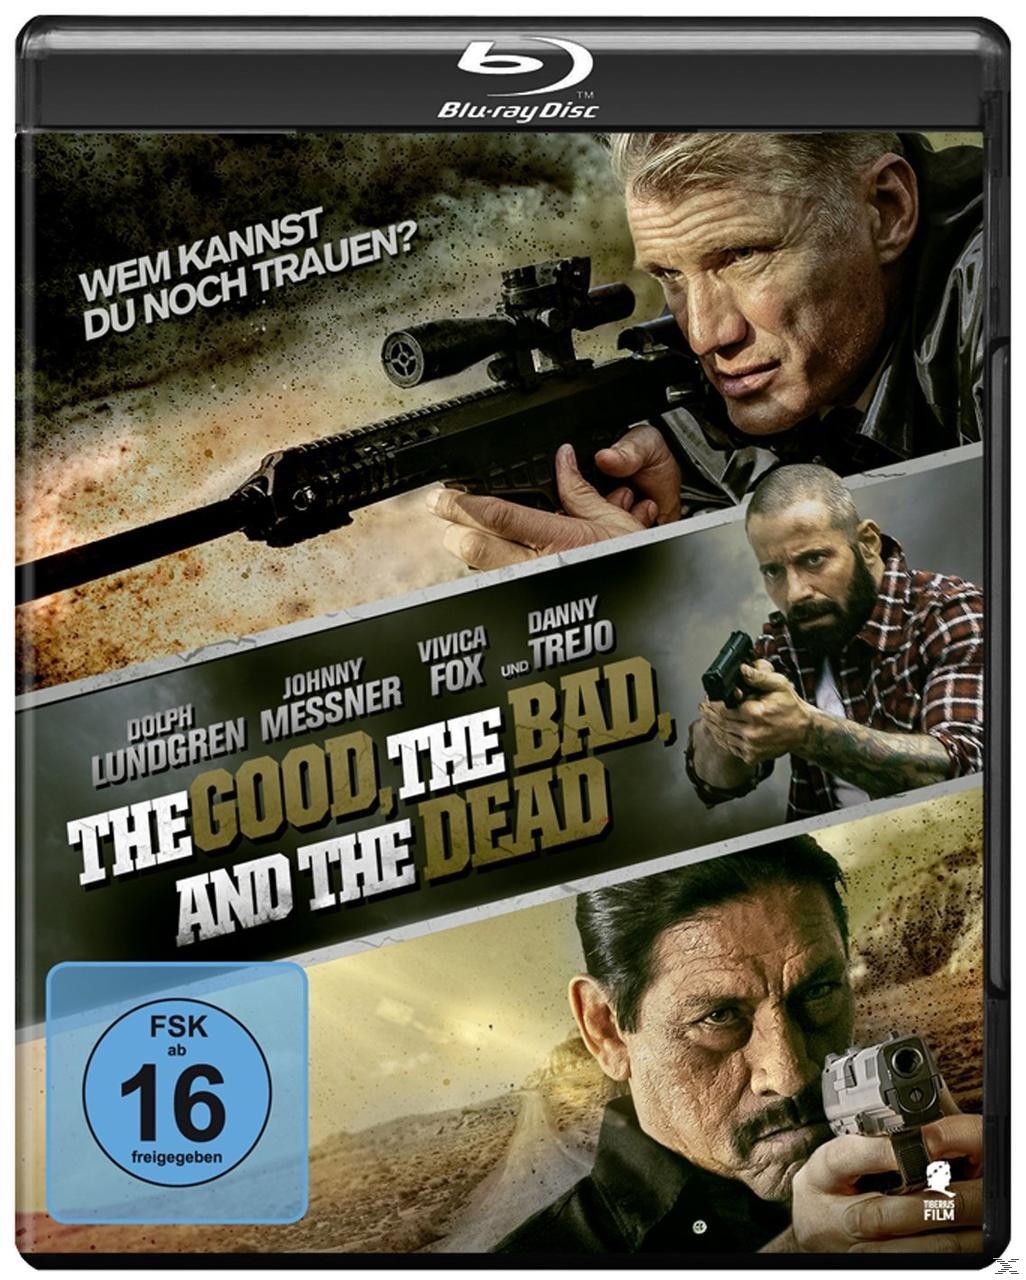 And The Bad Dead The Good, The Blu-ray